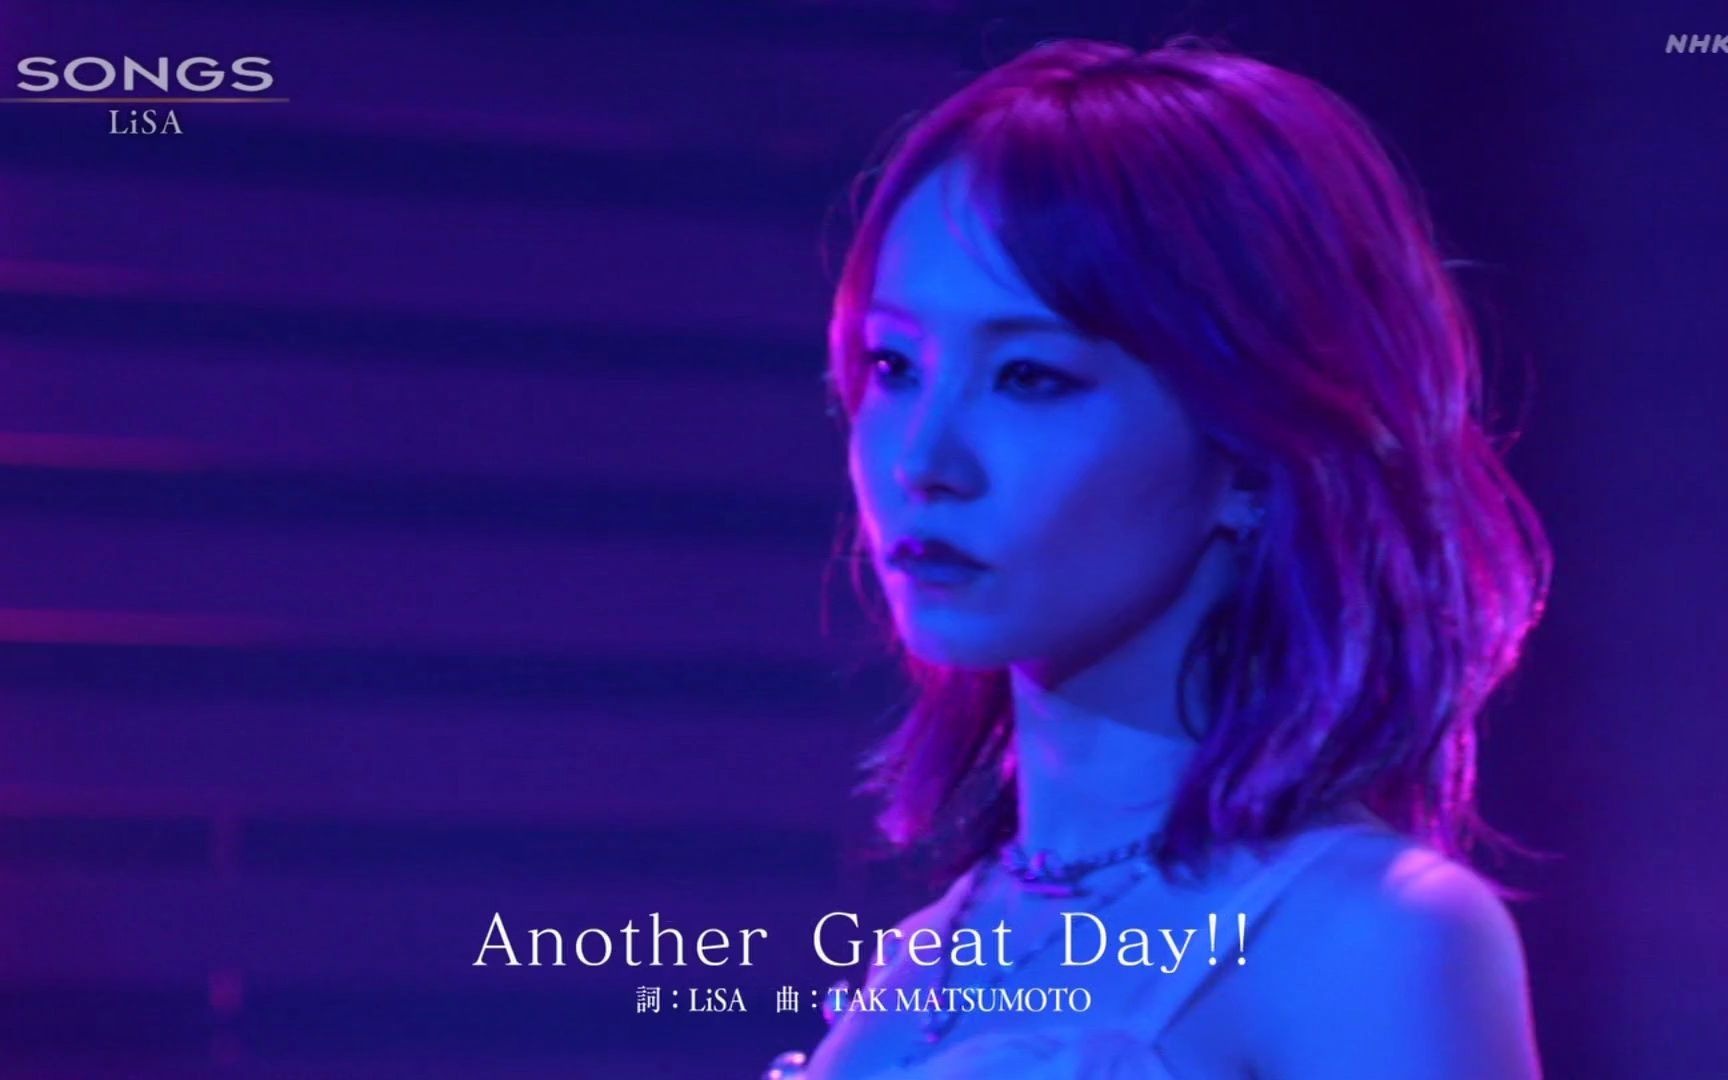 LiSA ピンクが星いのっ★ペンライト ANOTHER GREAT DAY